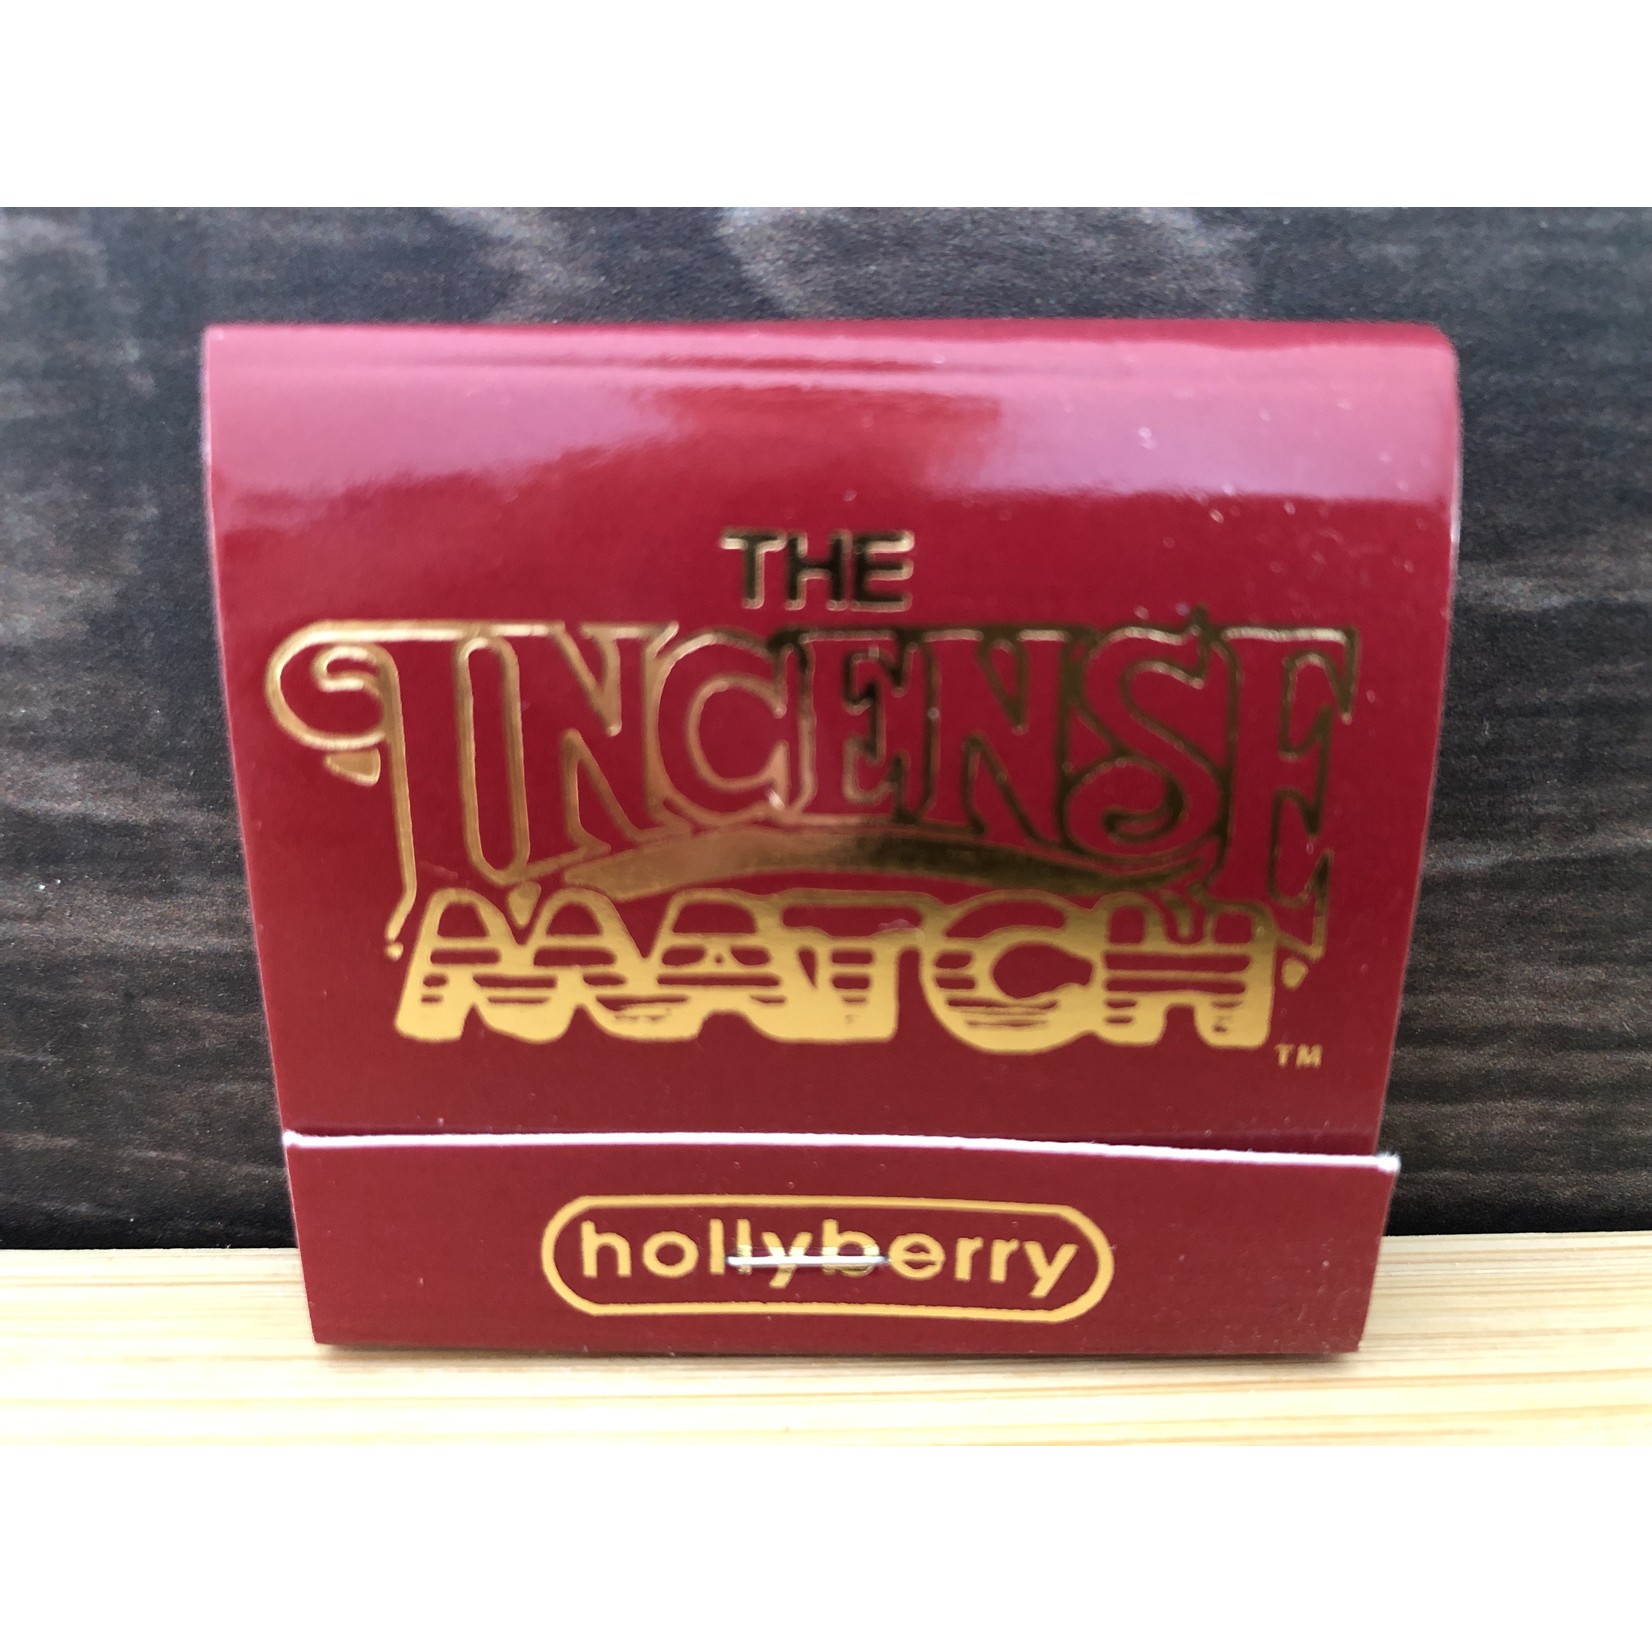 Portable Incense Matches- Odor-Eliminating, Lovely Scent for Home, Travel and Gifts